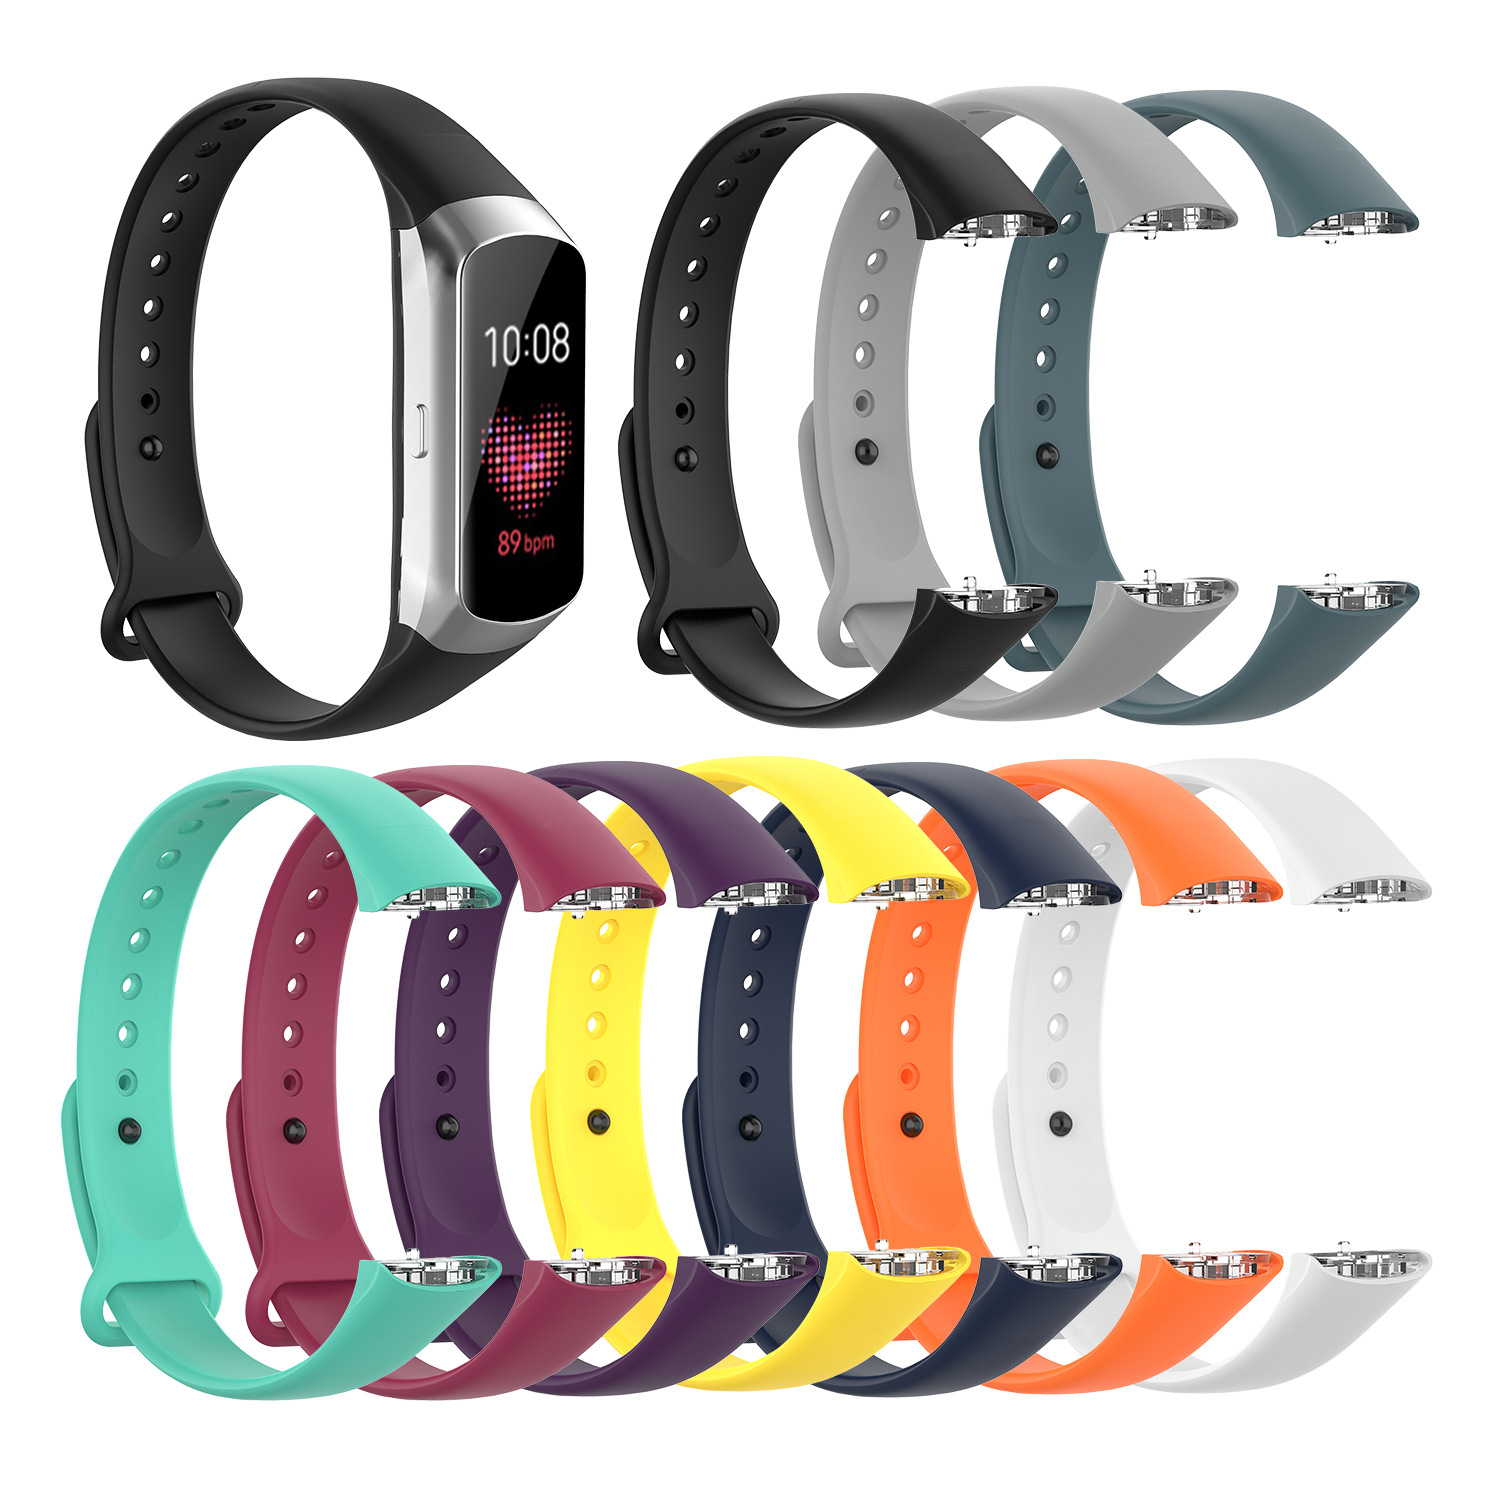 

Bakeey Pure Soft Silicone Smart Bracelet Watch Band Strap Replacement for Samsung Galaxy Fit SM-R370